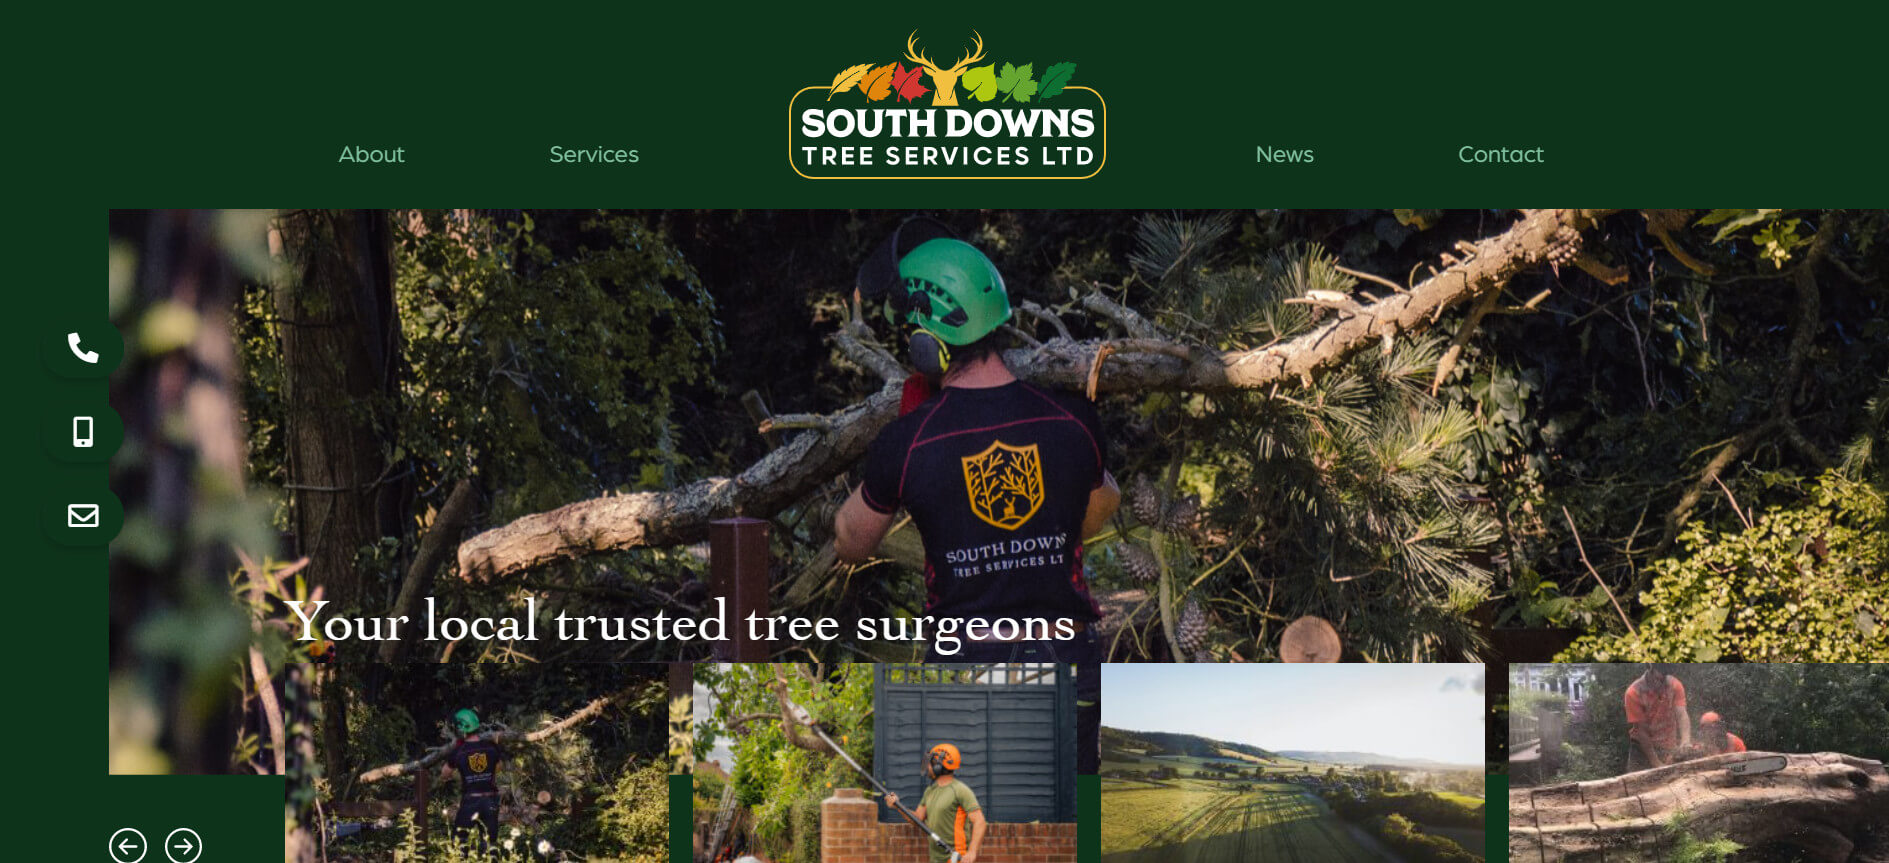 South Downs Tree Services